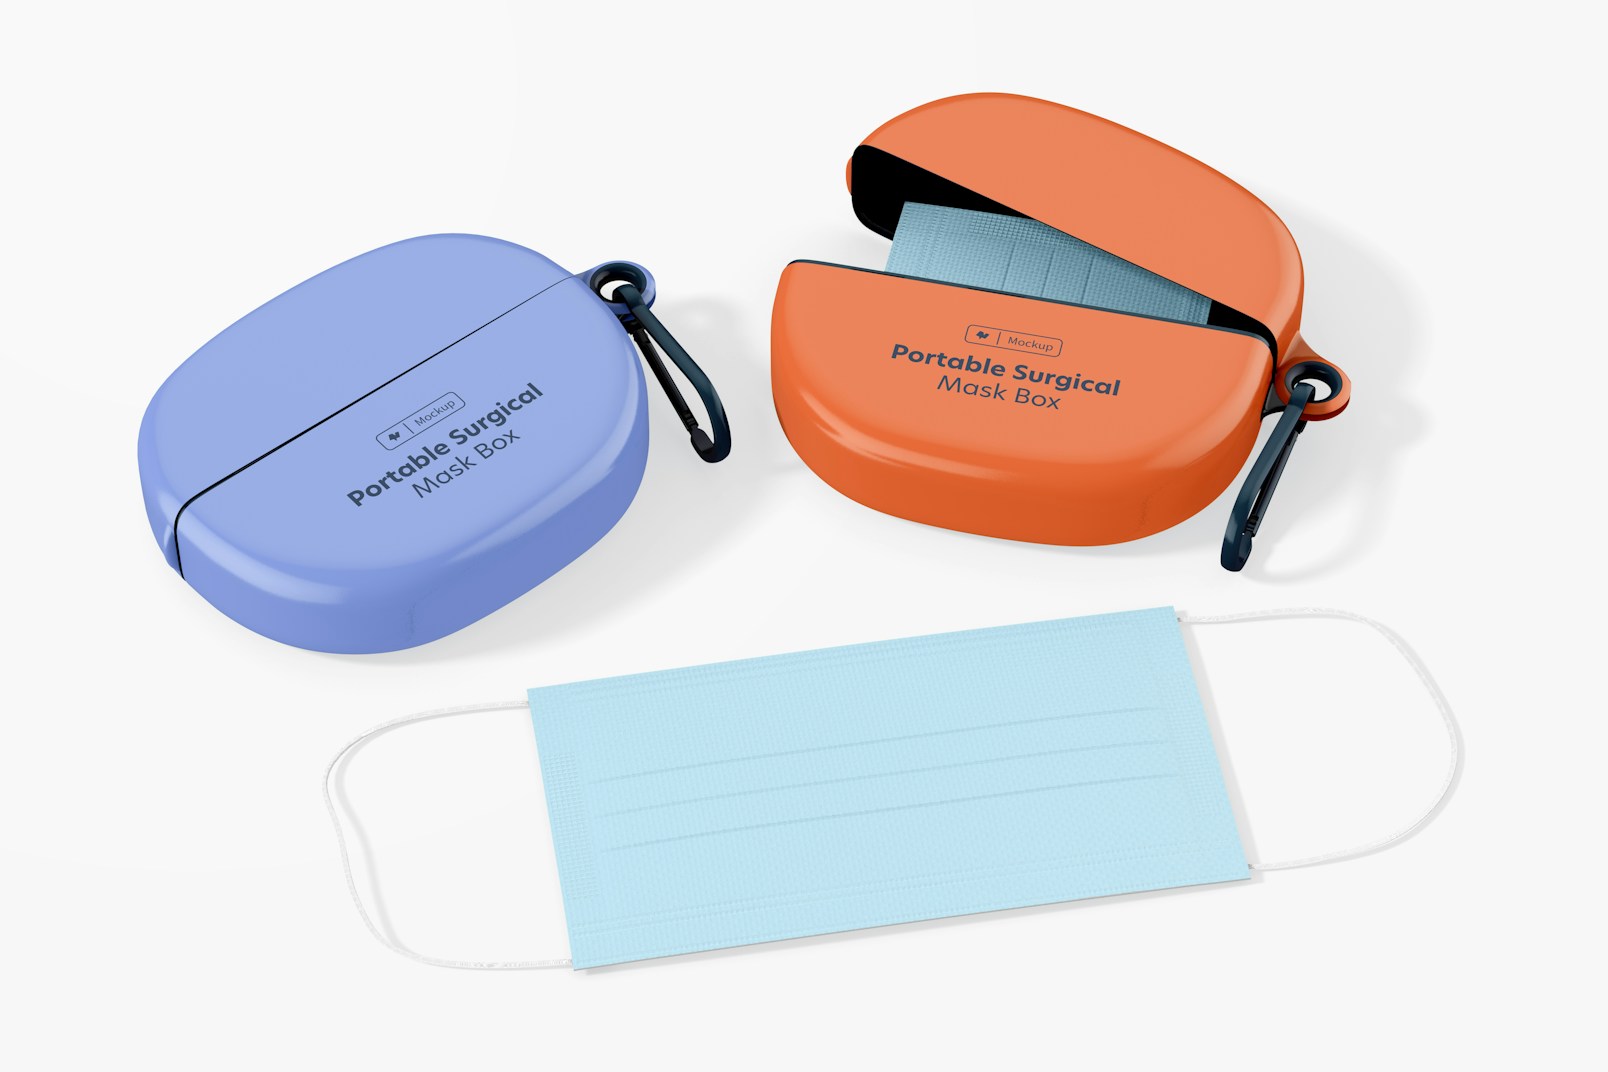 Portable Surgical Mask Box Mockup, Opened and Closed